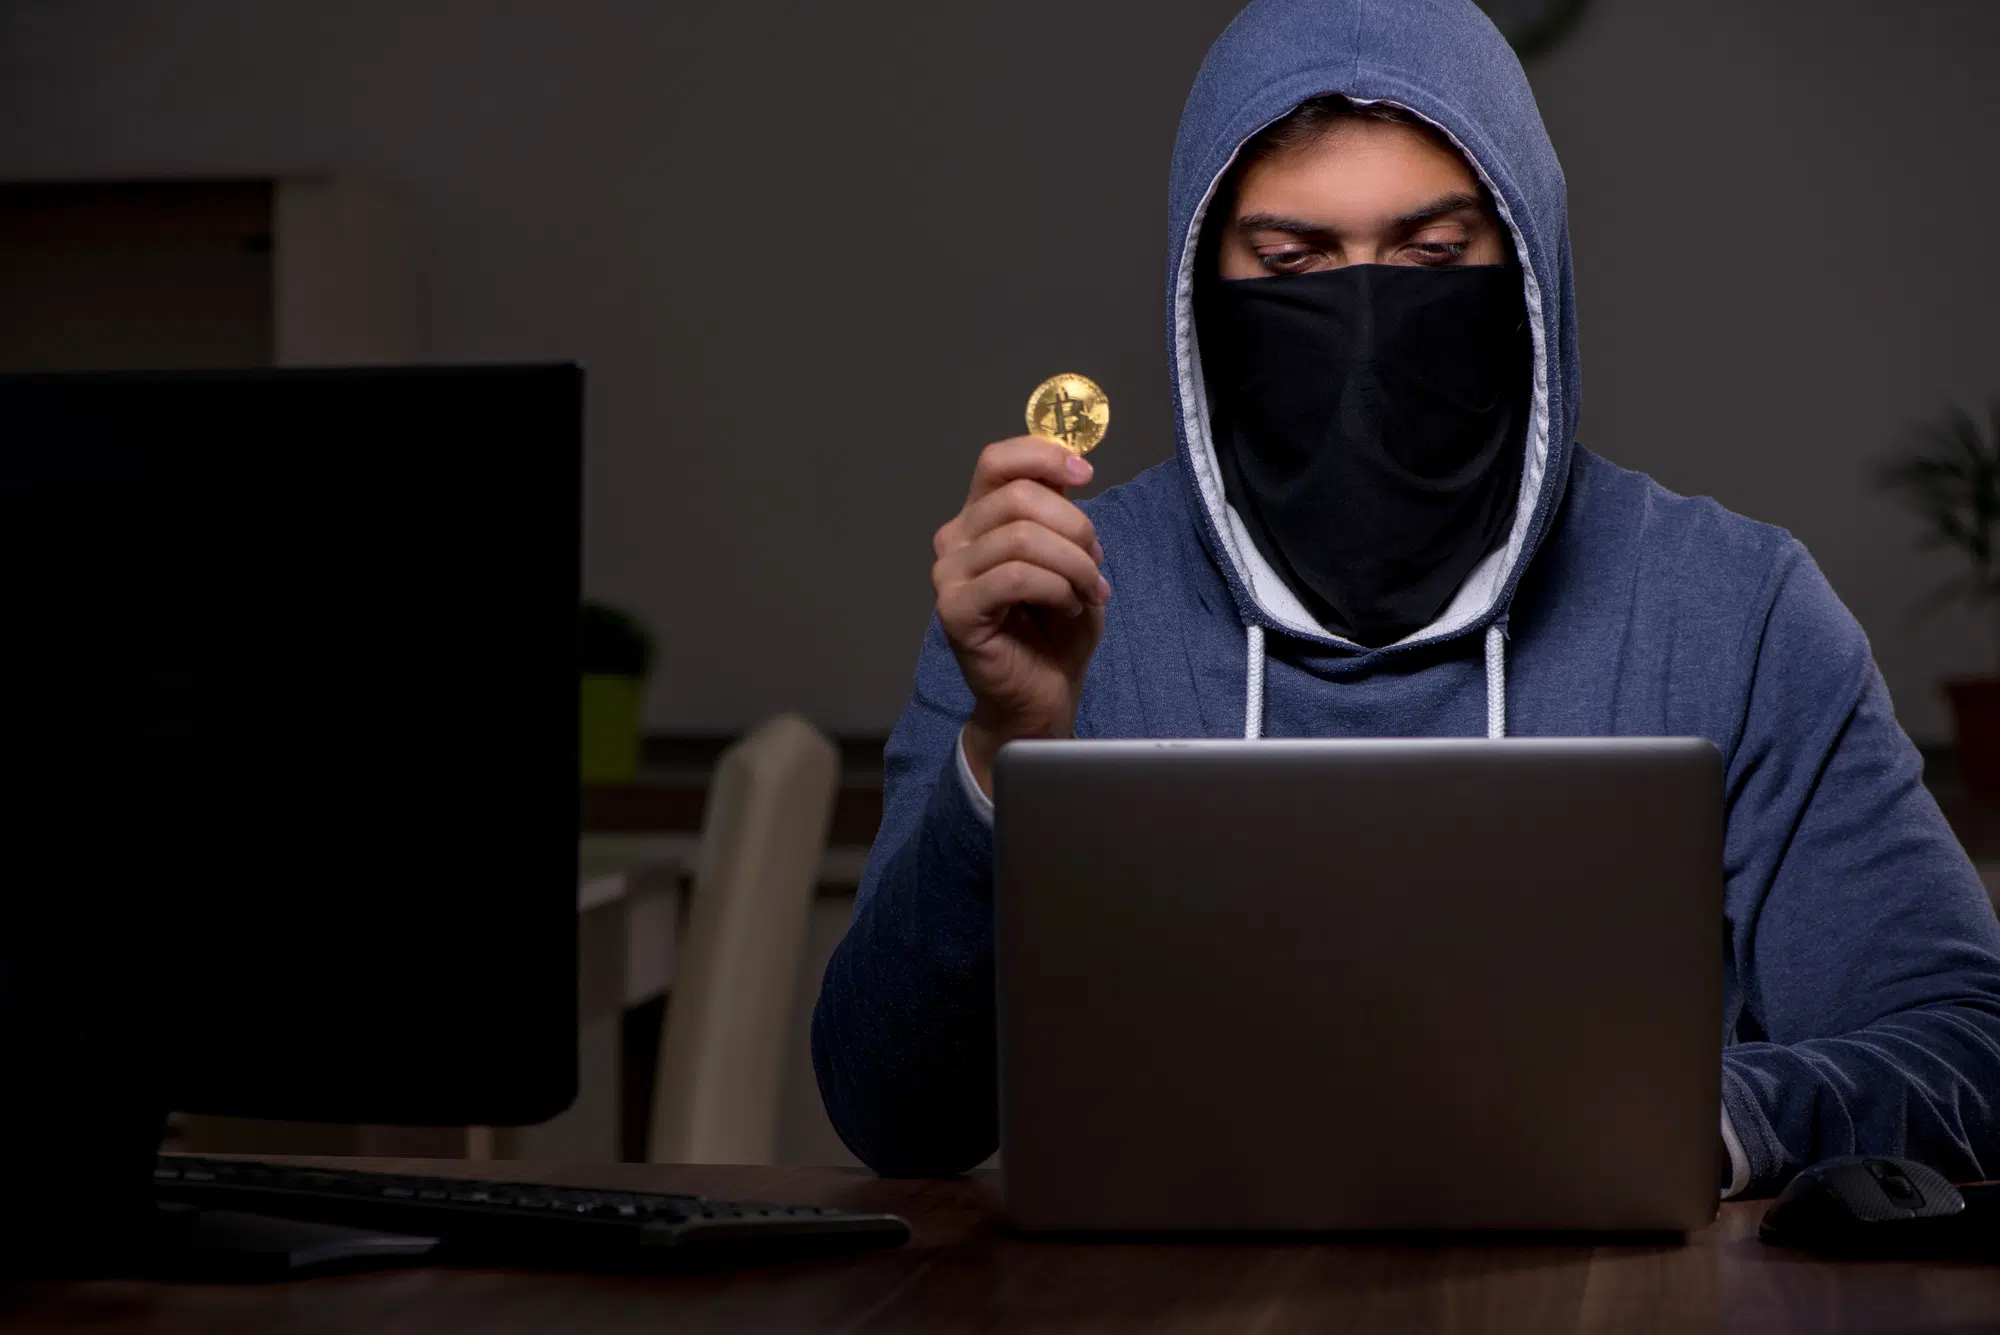 Male hacker hacking security firewall late in the office